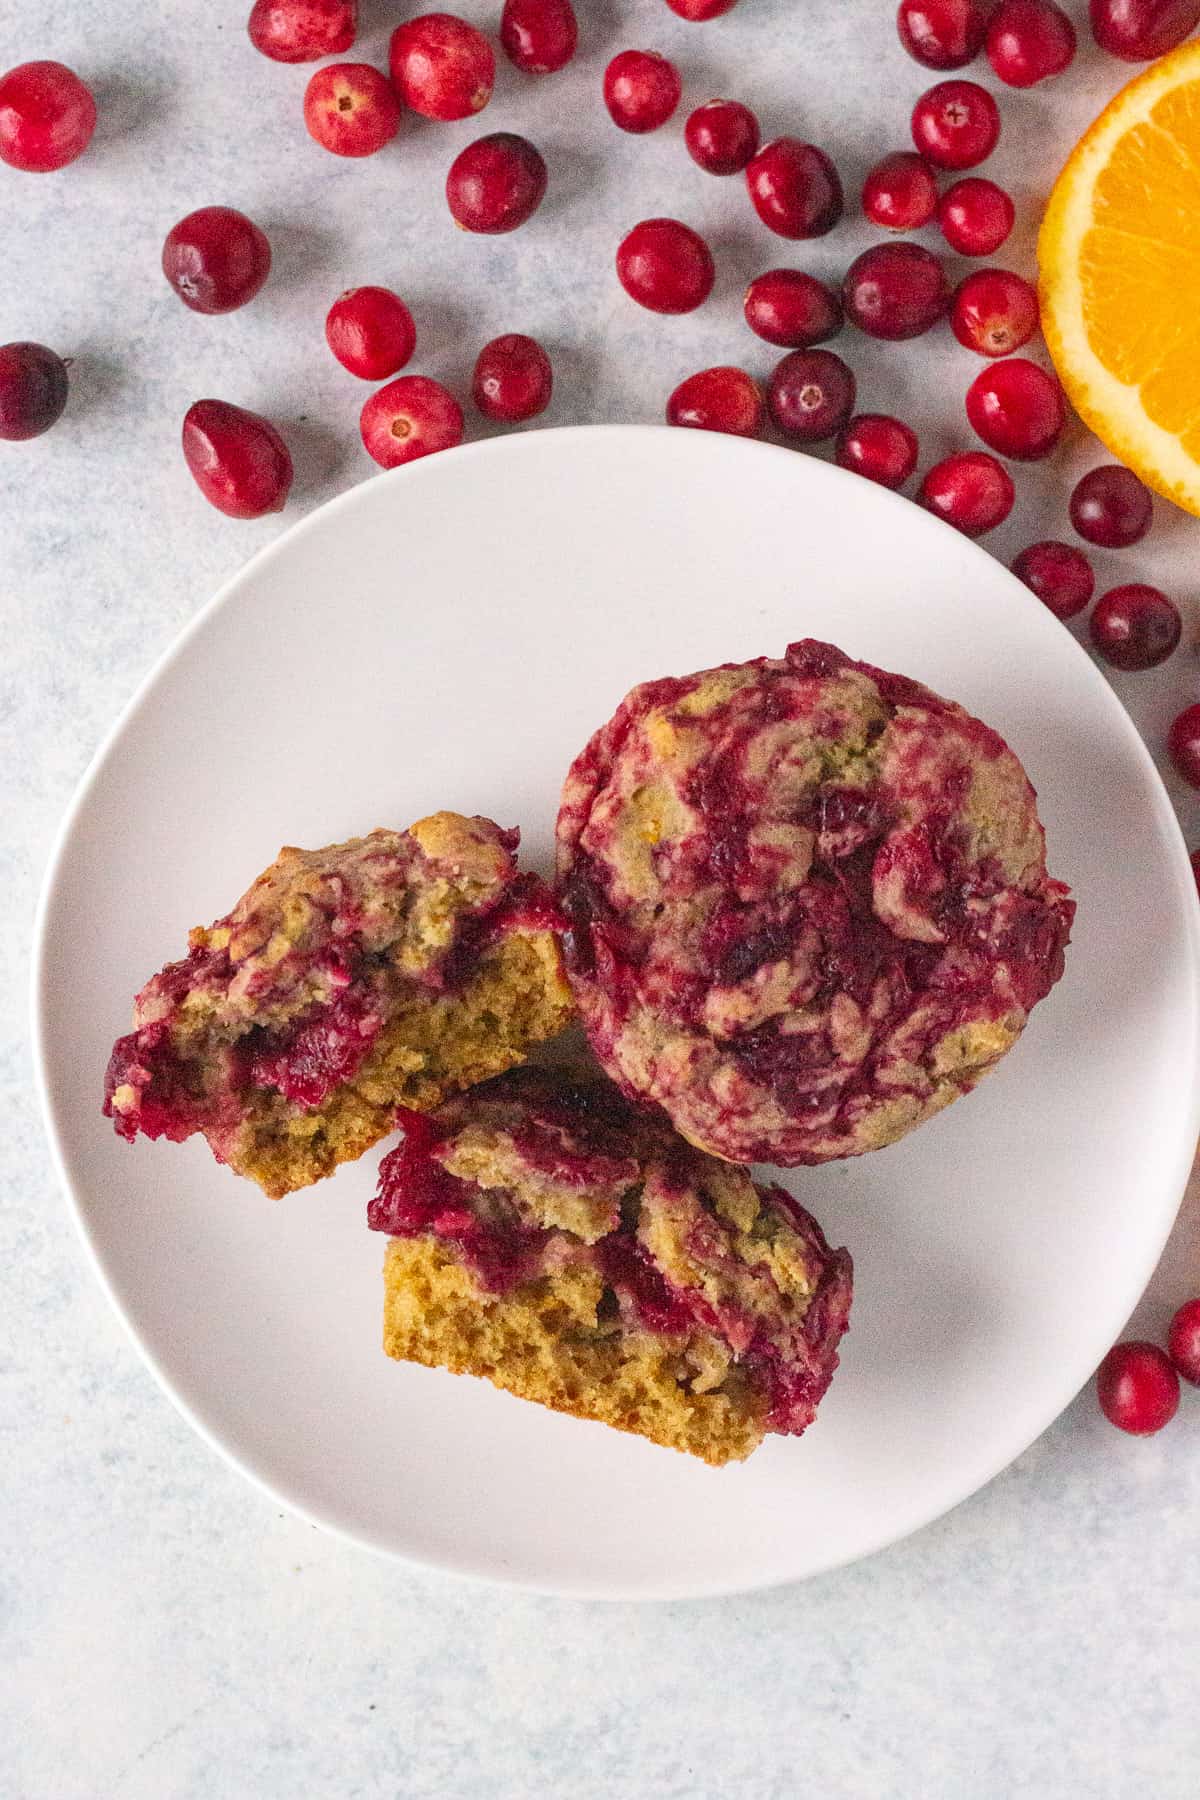 top down shot of two cranberry orange muffins on a white plate, one of which is cut in half. Fresh cranberries and an orange slice lie next to the plate.